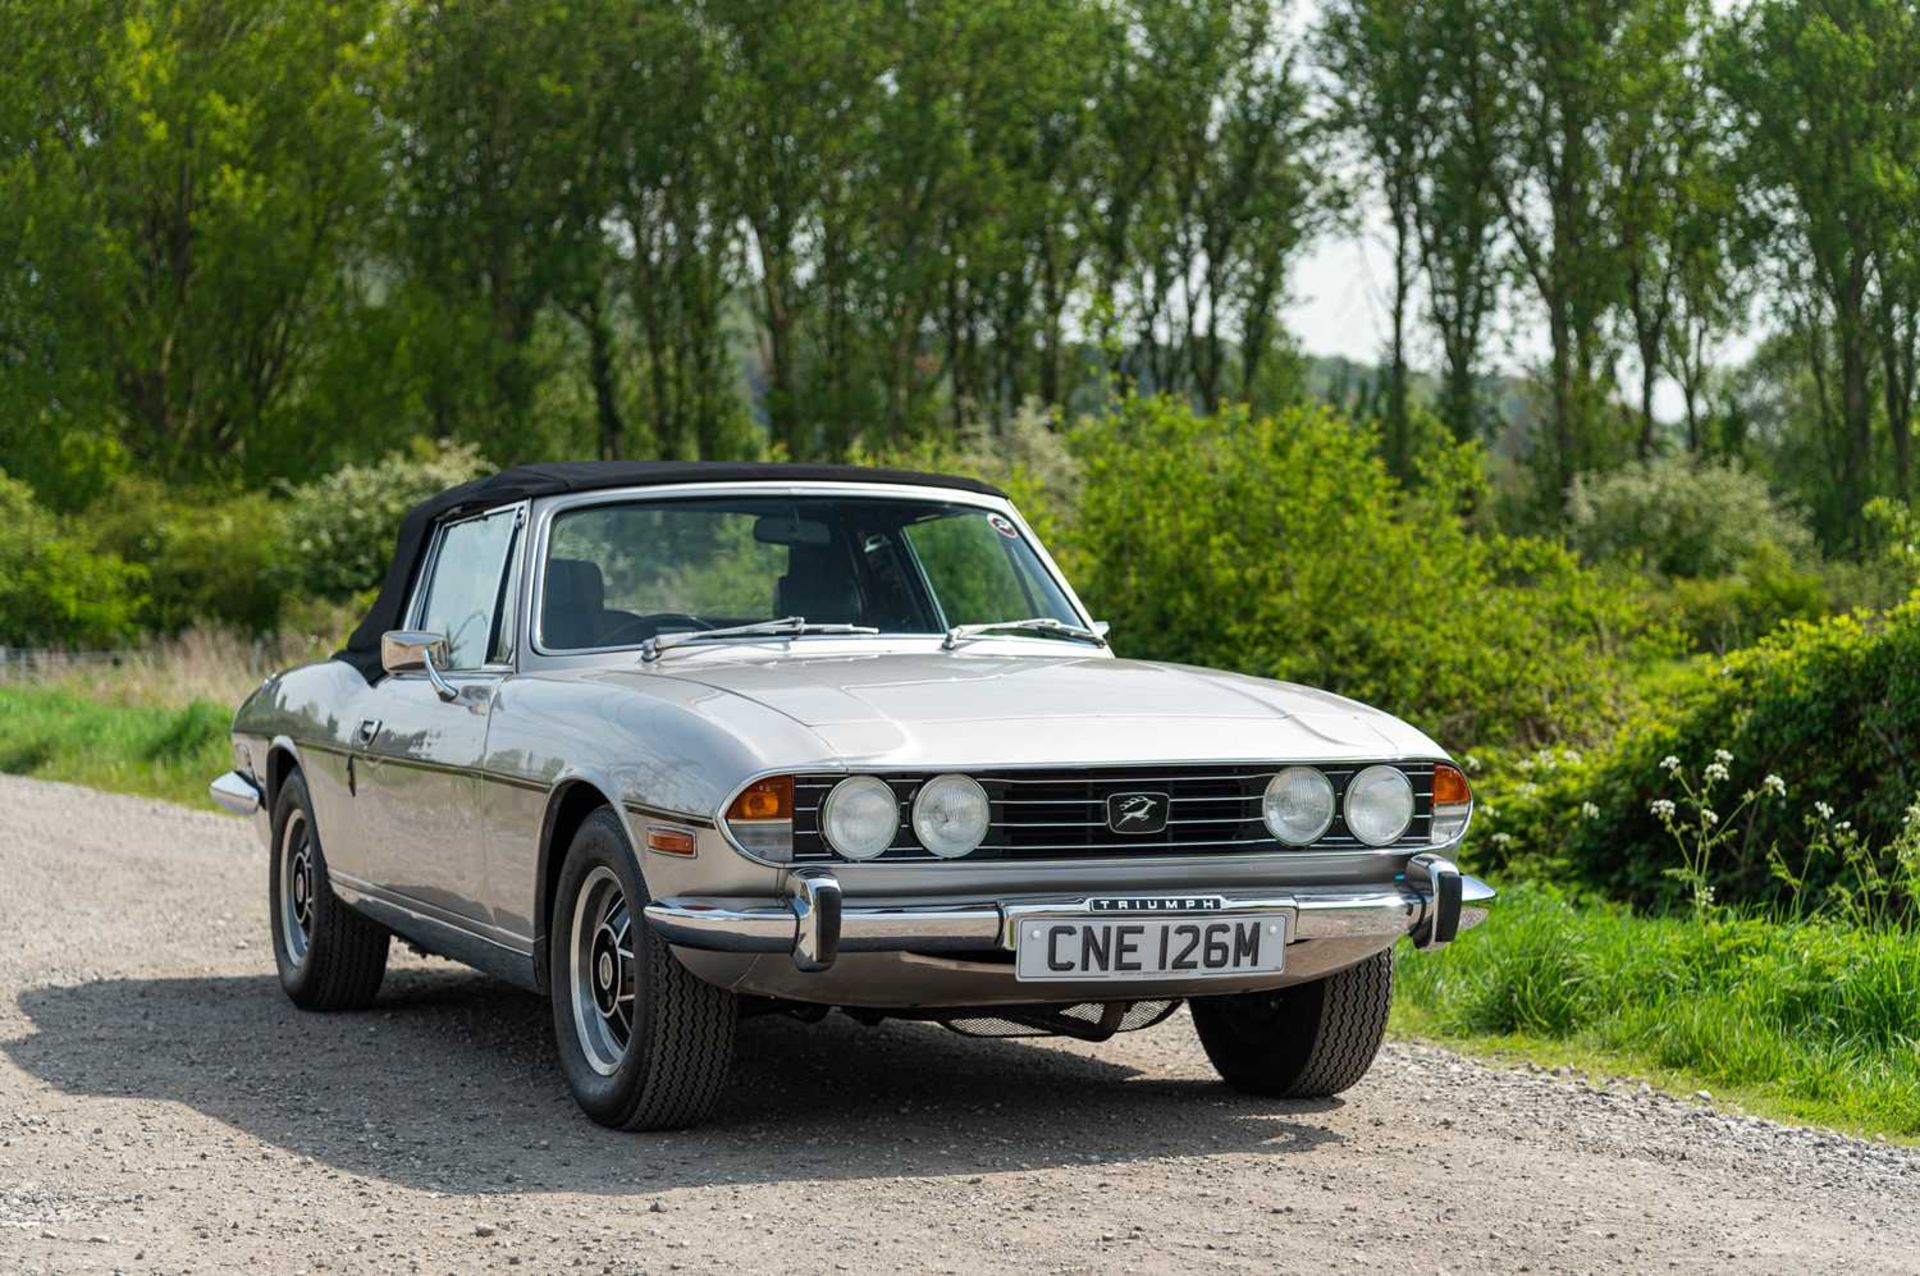 1974 Triumph Stag ***NO RESERVE*** Fully-restored example, equipped with manual overdrive transmissi - Image 3 of 83